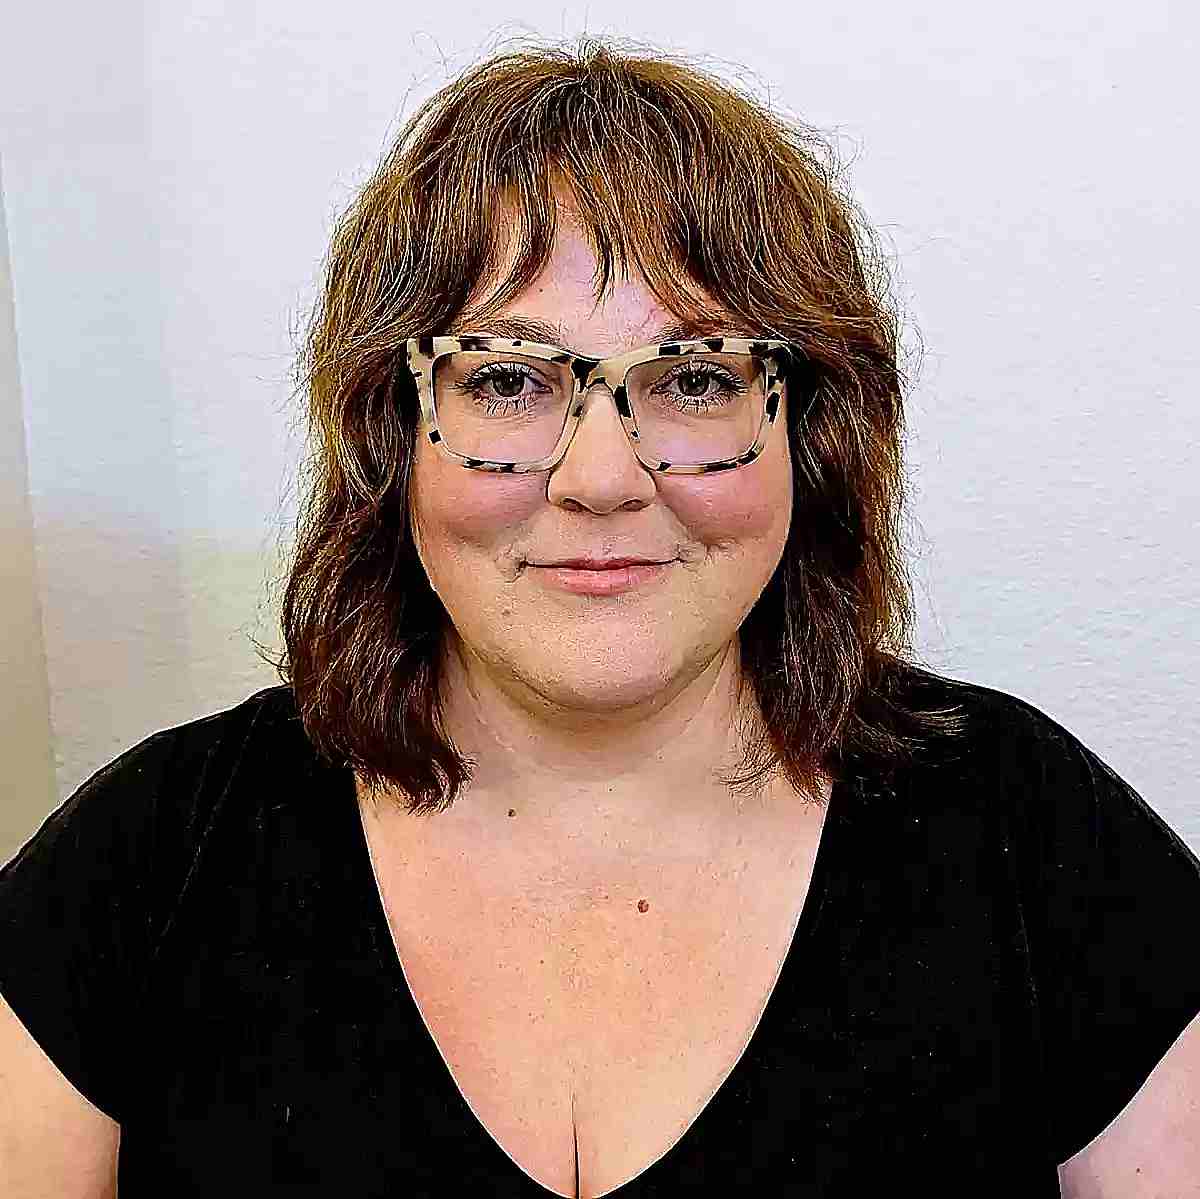 Medium Shaggy Haircut with Thin Bangs for Ladies Aged 40 with Glasses